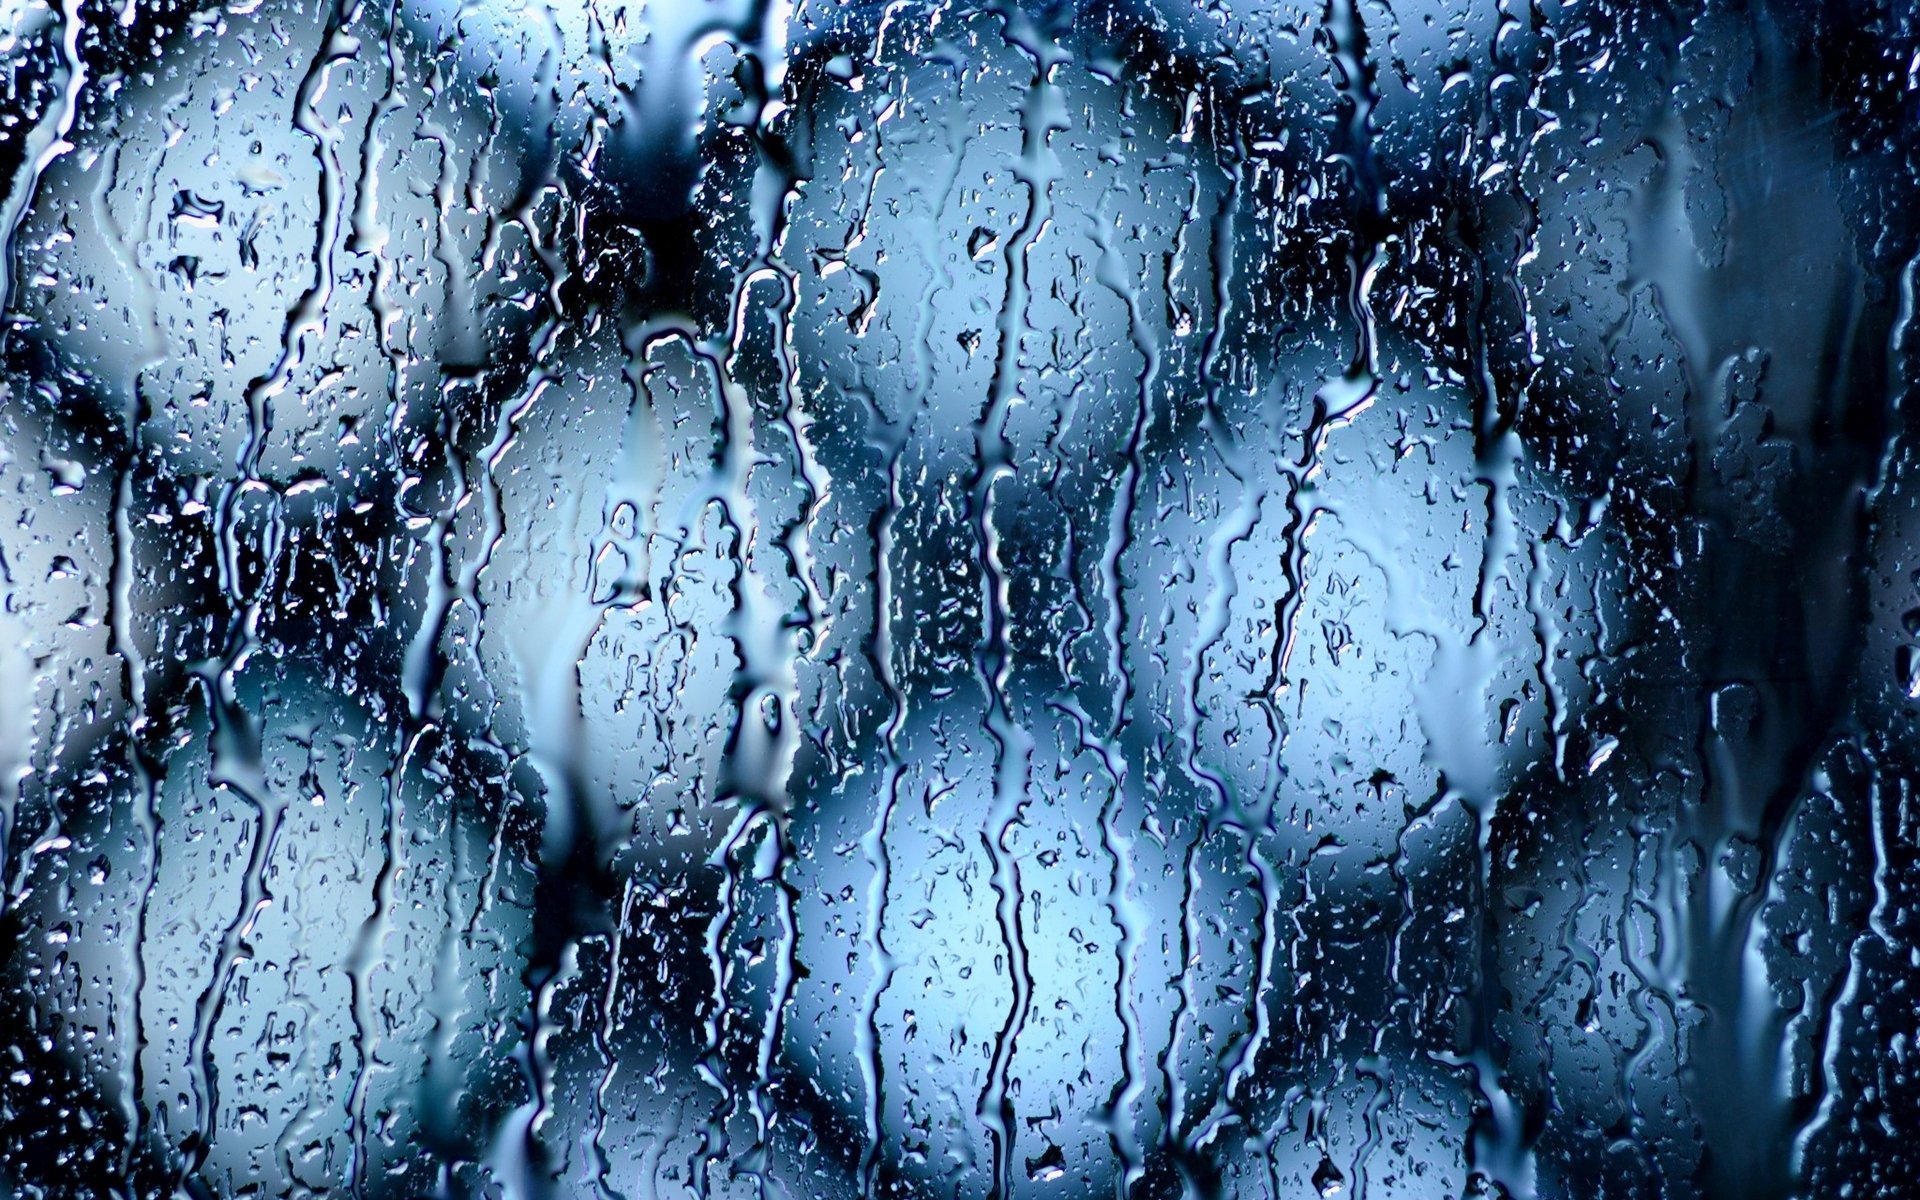 photography, Blue, Water, Glass, Fence, Water on glass, Blurred, Water drops, Square, Depth of field Wallpaper